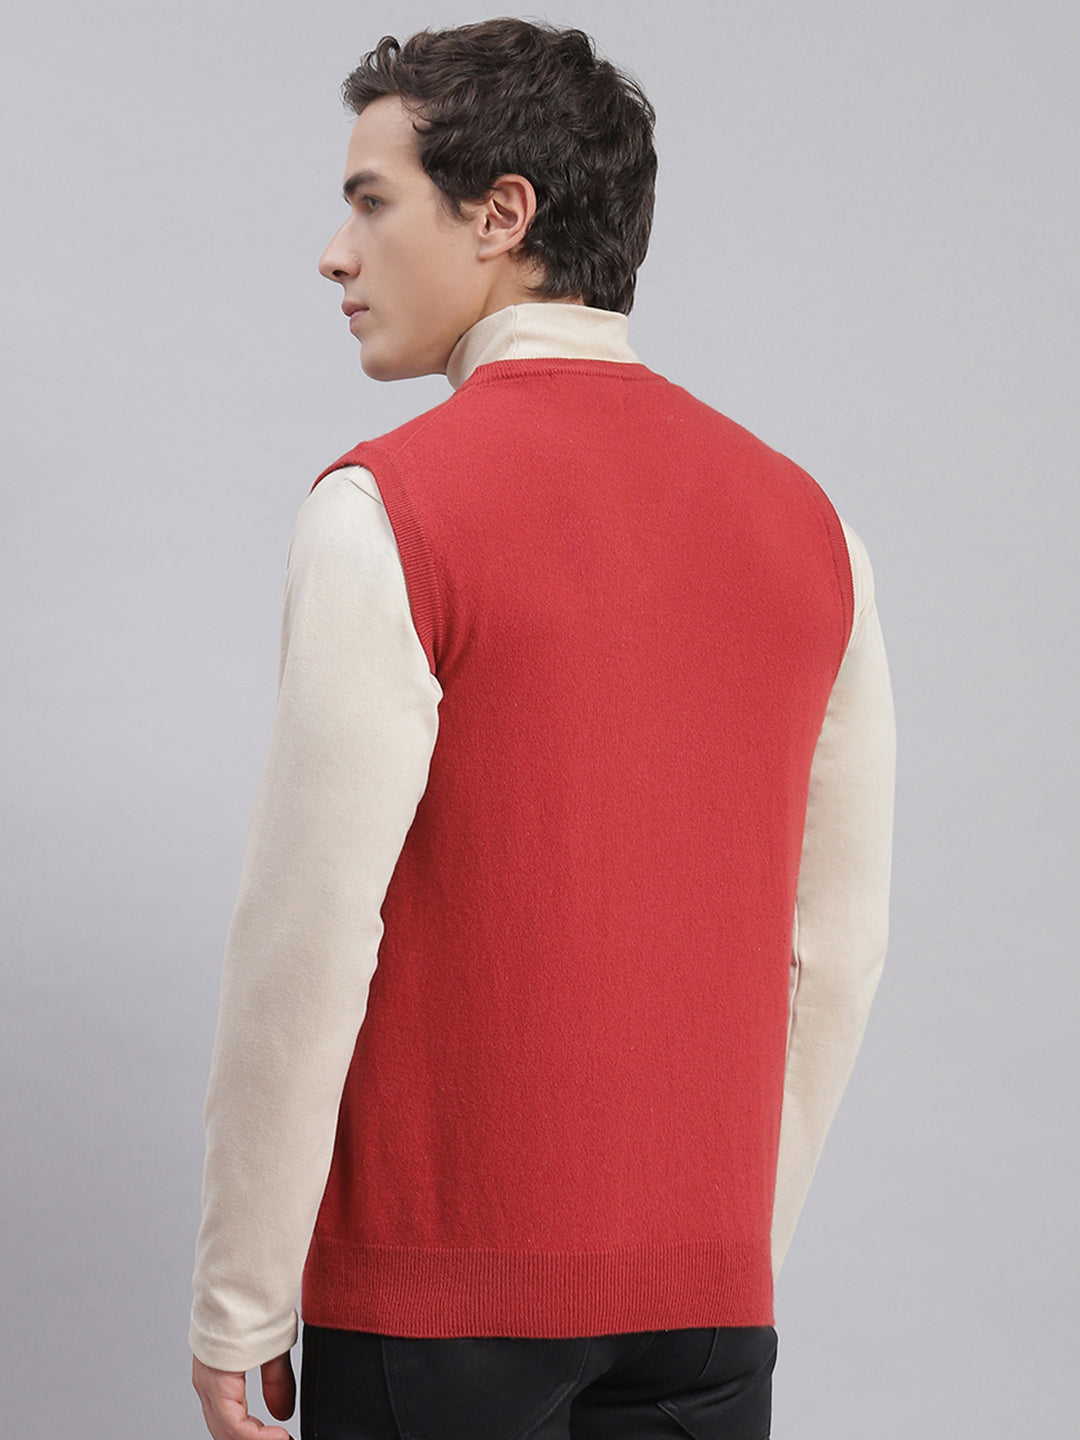 Men Red Solid V Neck Sleeveless Sweaters/Pullovers